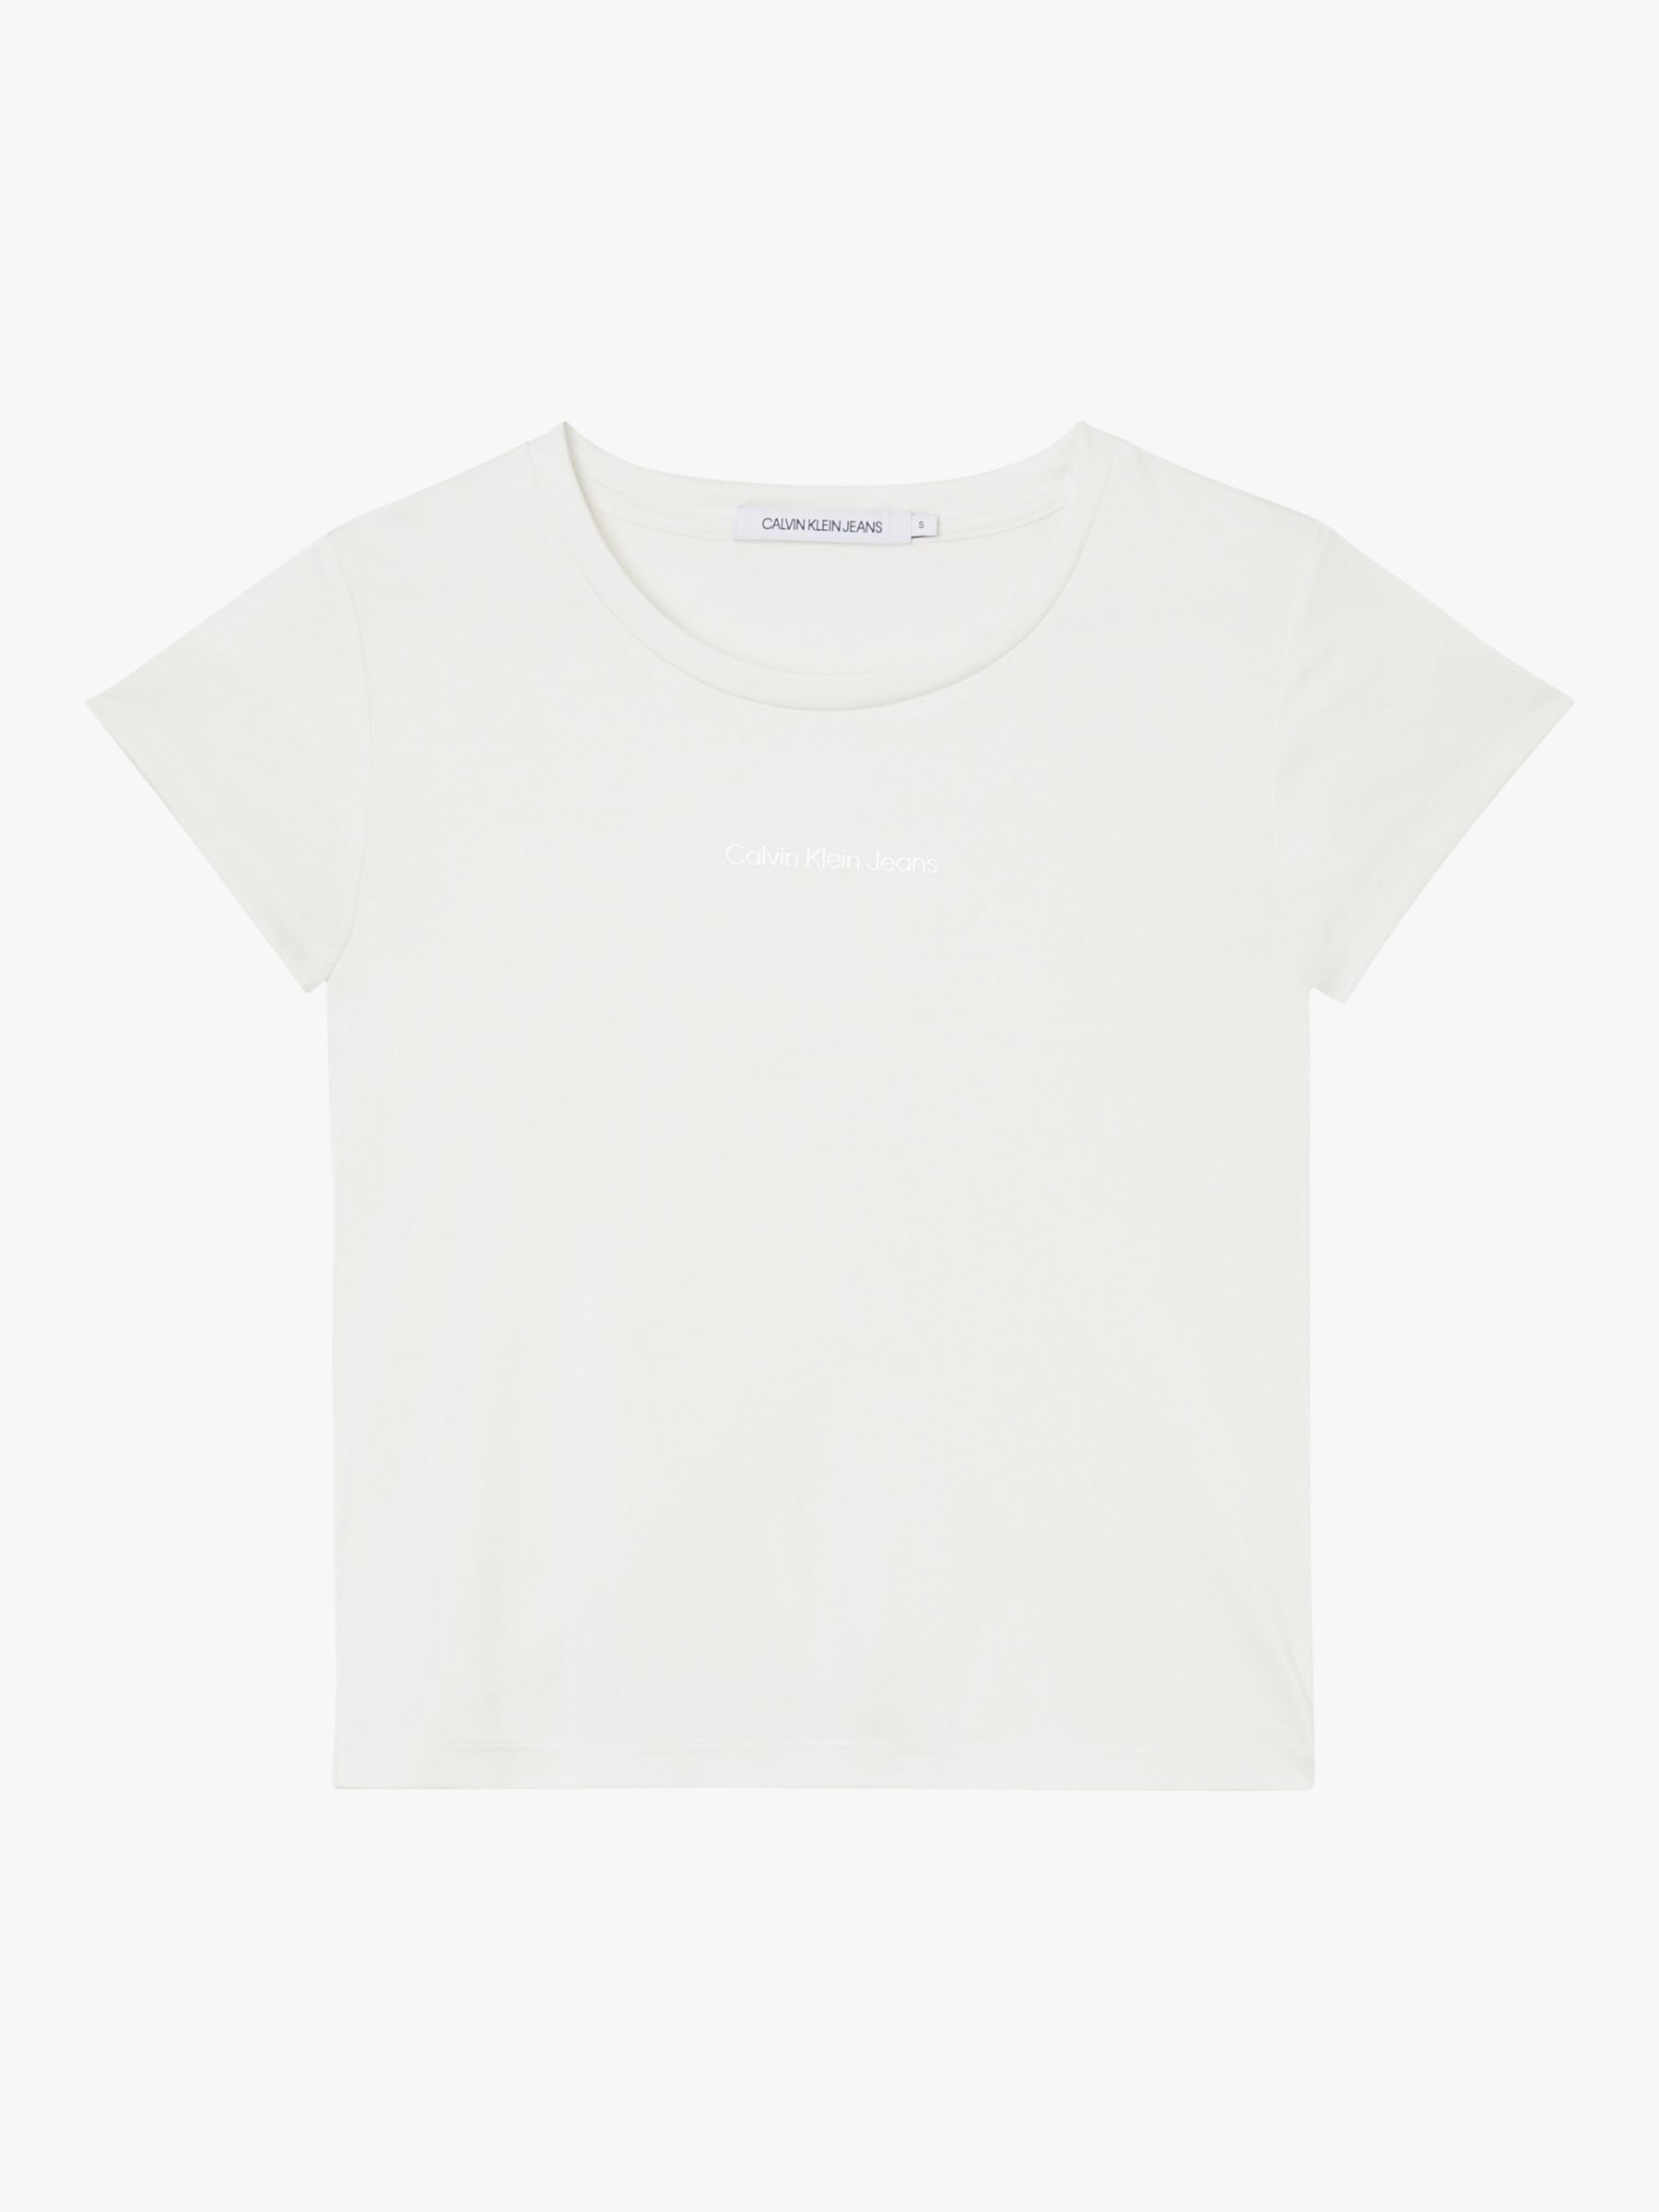 Calvin Klein Jeans Slim Fit T-Shirt, Pearlised White